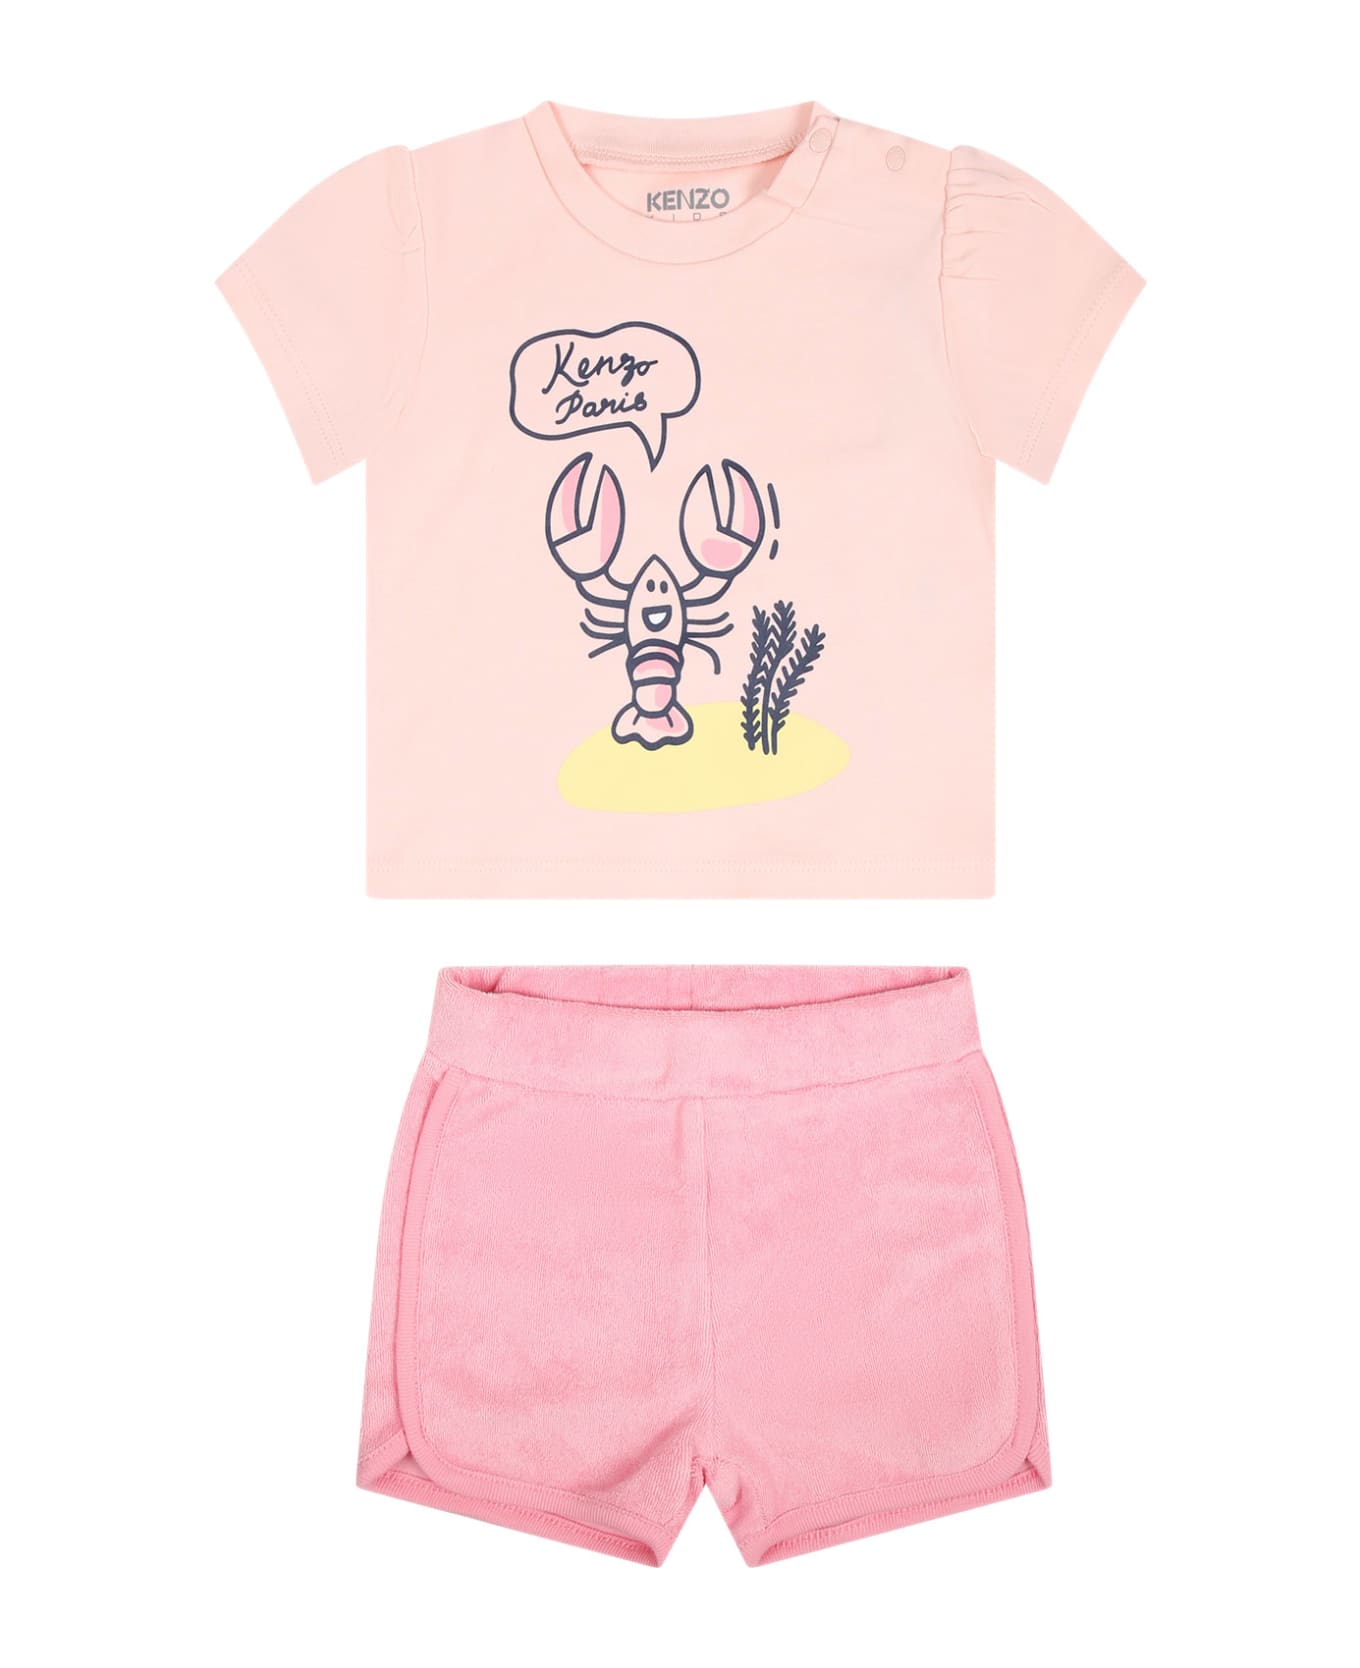 Kenzo Kids Pink Sporty Suit For Baby Girl With Printing - Pink ボトムス